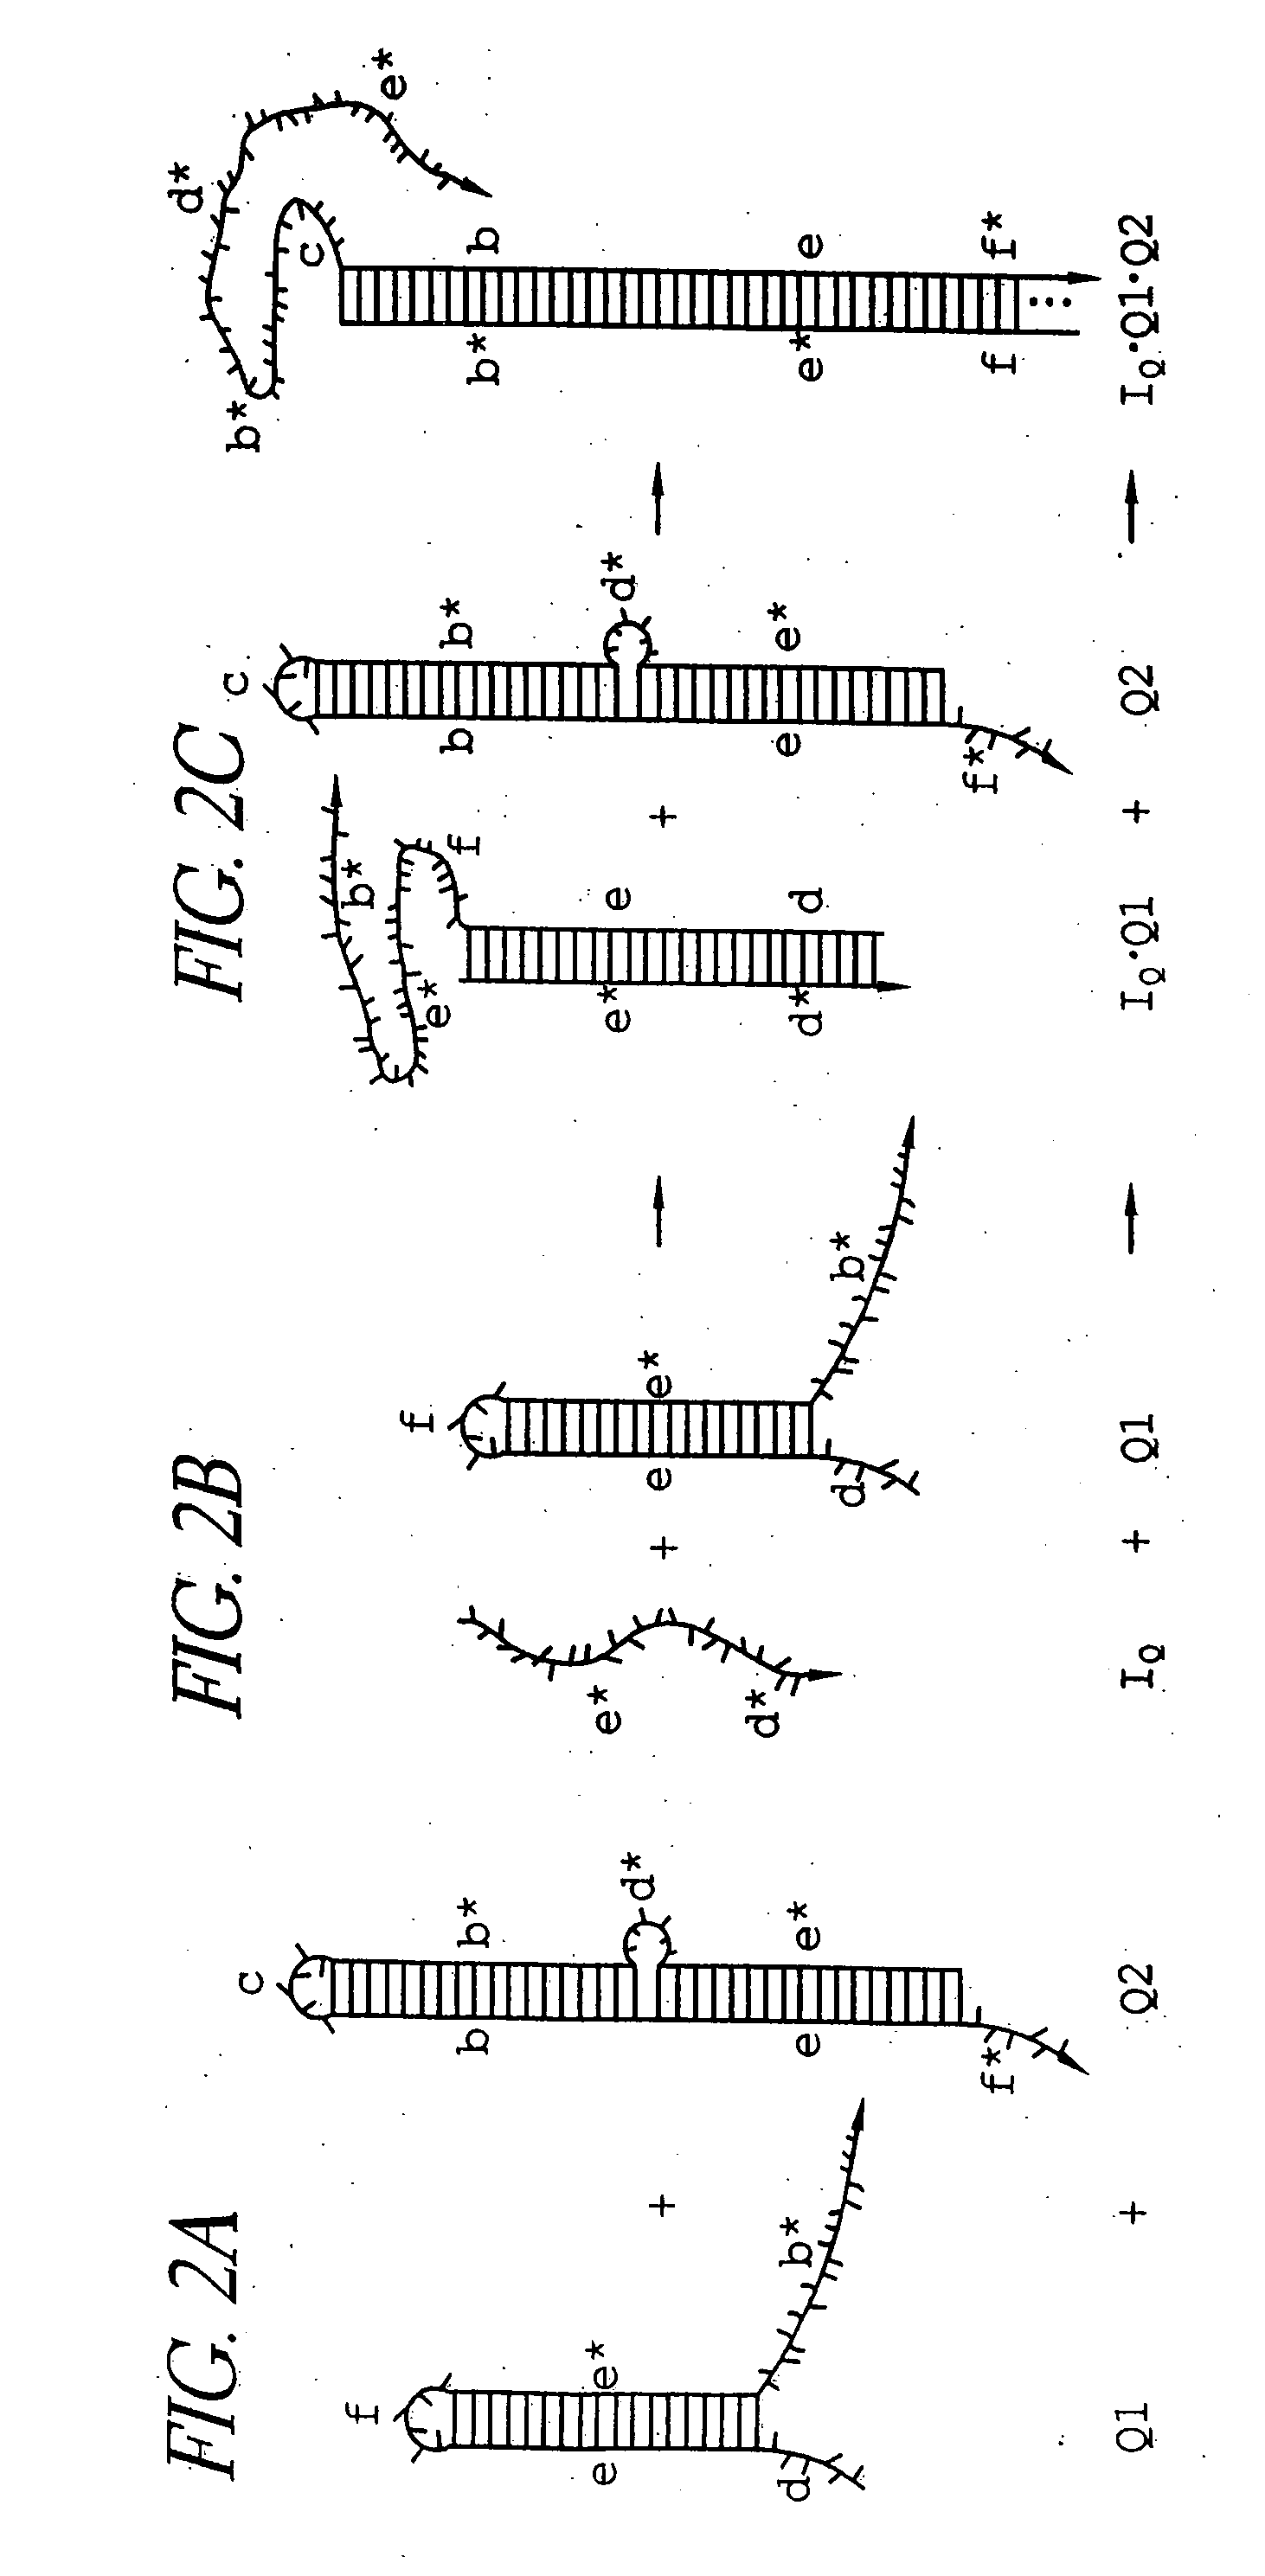 Hybridization chain reaction amplification for in situ imaging